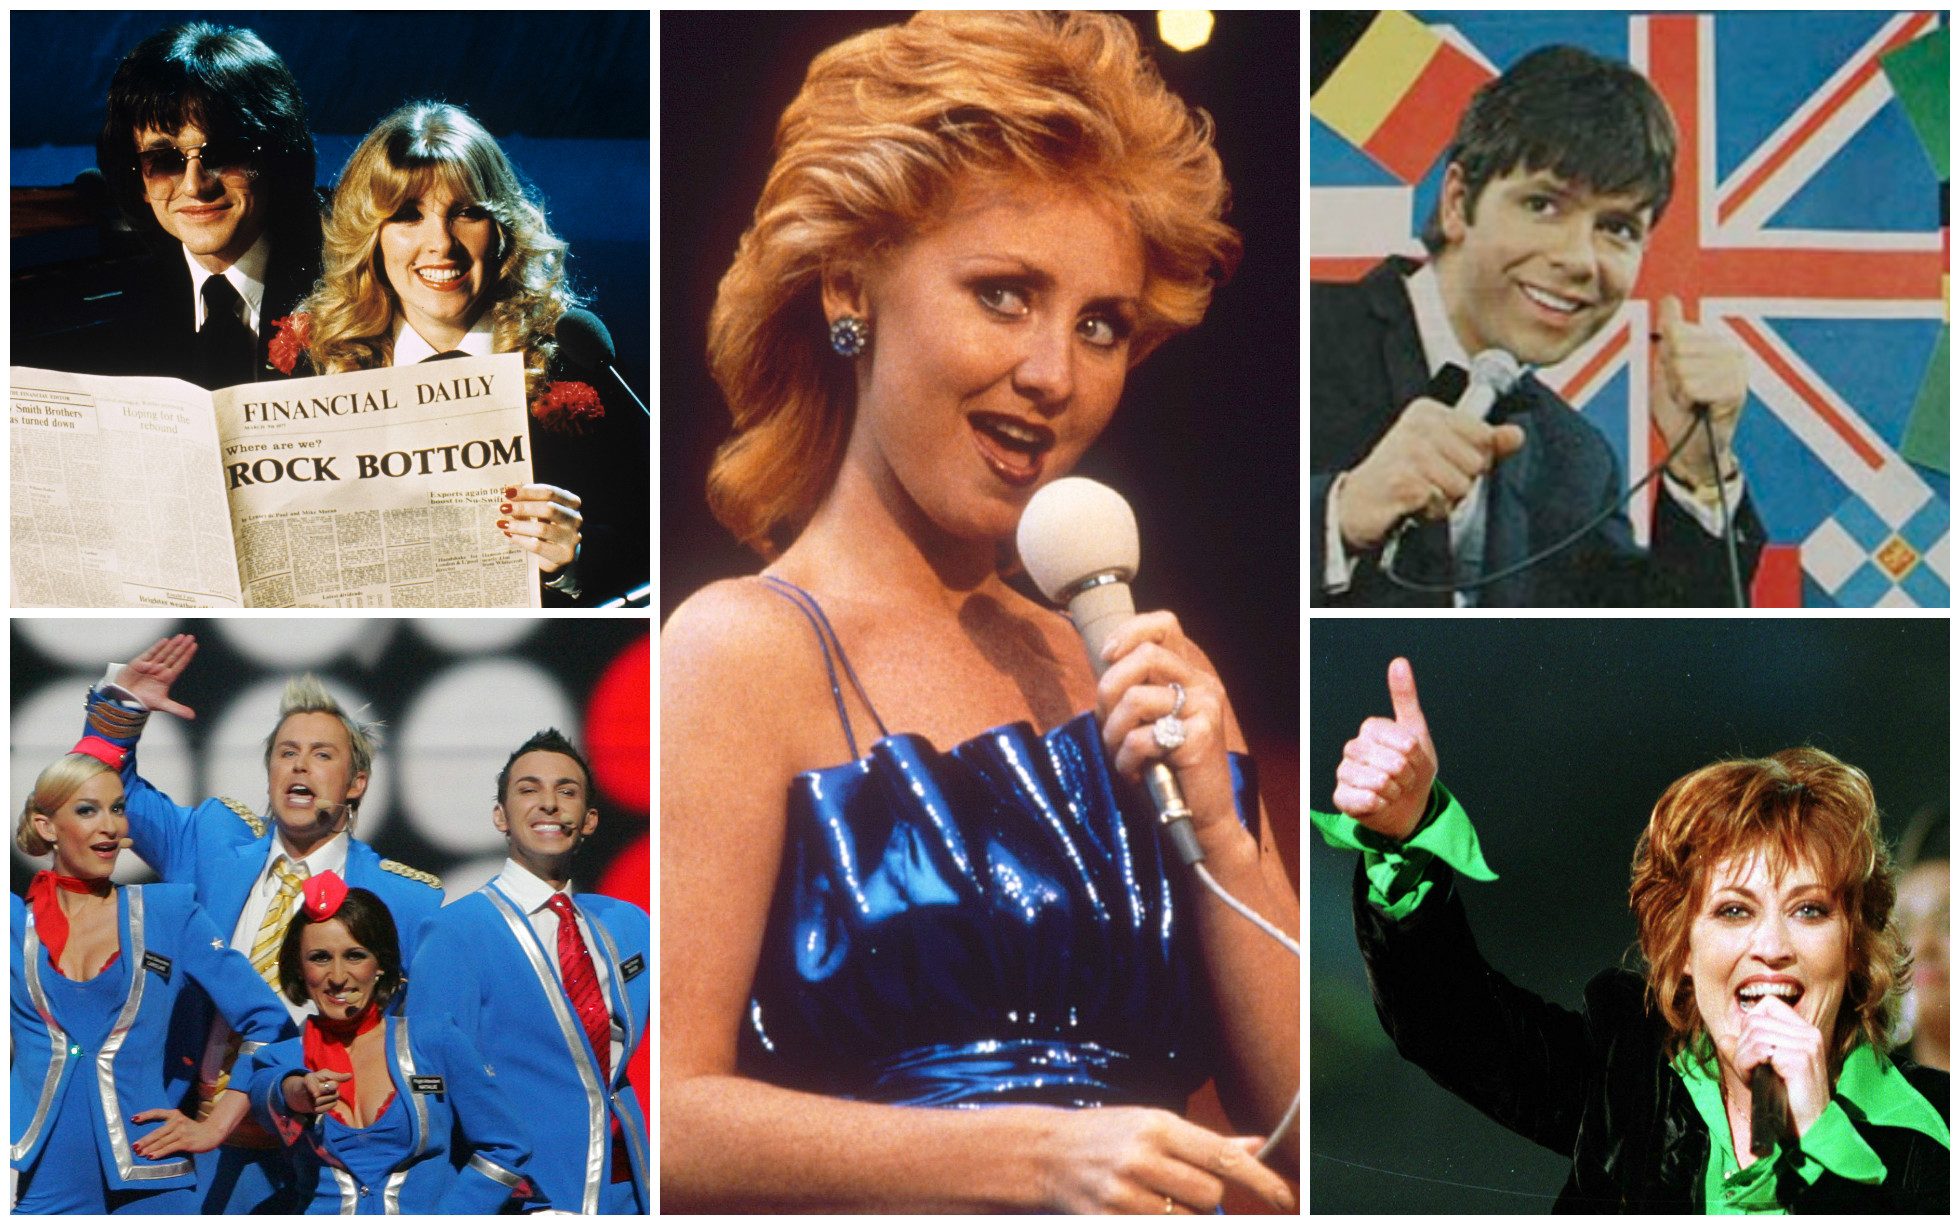 eurovision: every single uk entry ranked, from worst to best